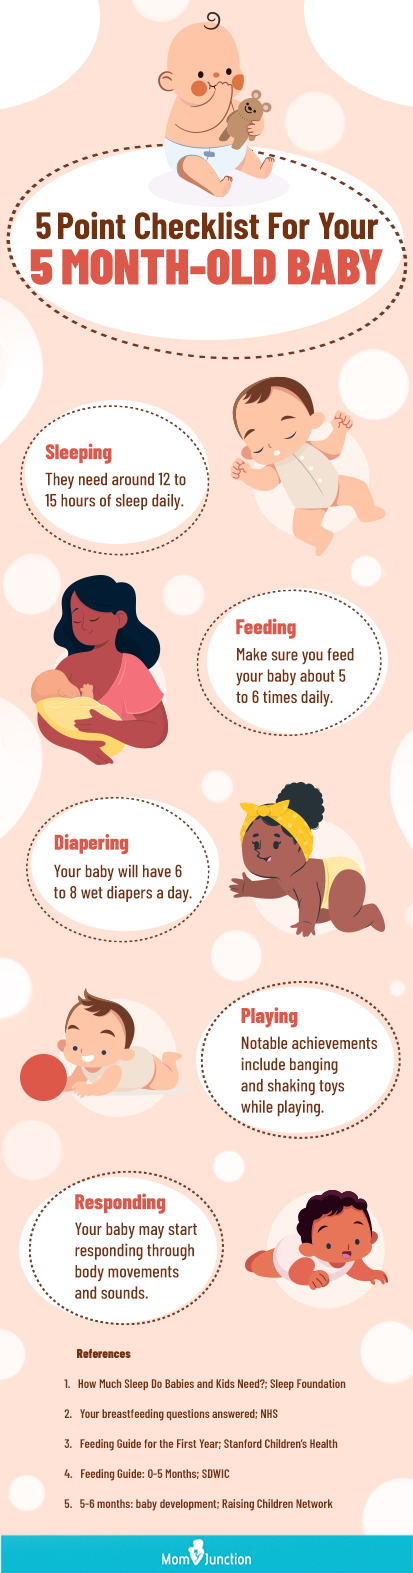 checklist for your 5 month old baby (infographic)